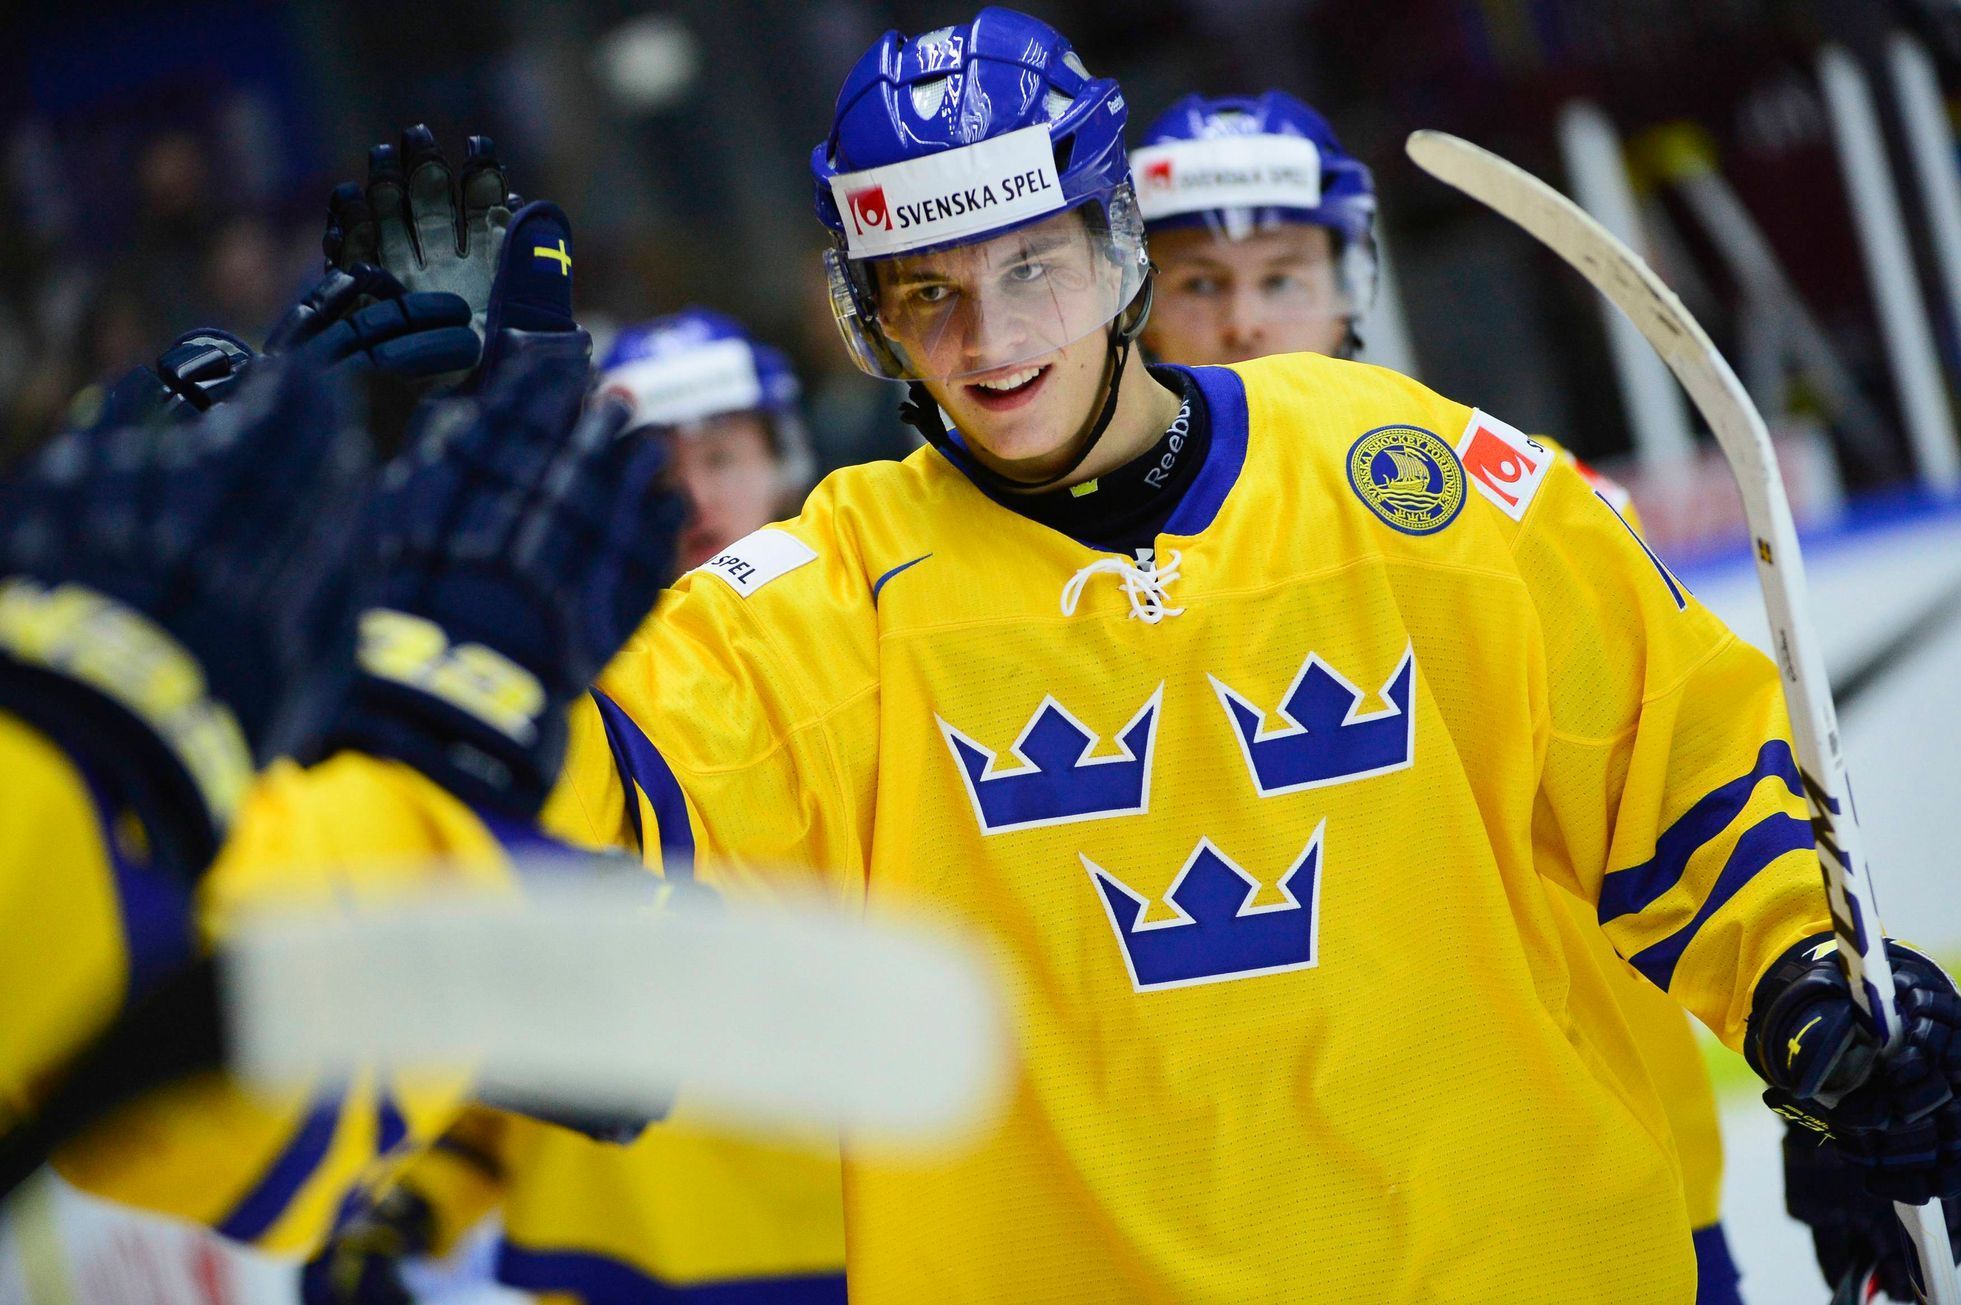 Sweden celebrates goal against Norway during IIHF game in Malmo